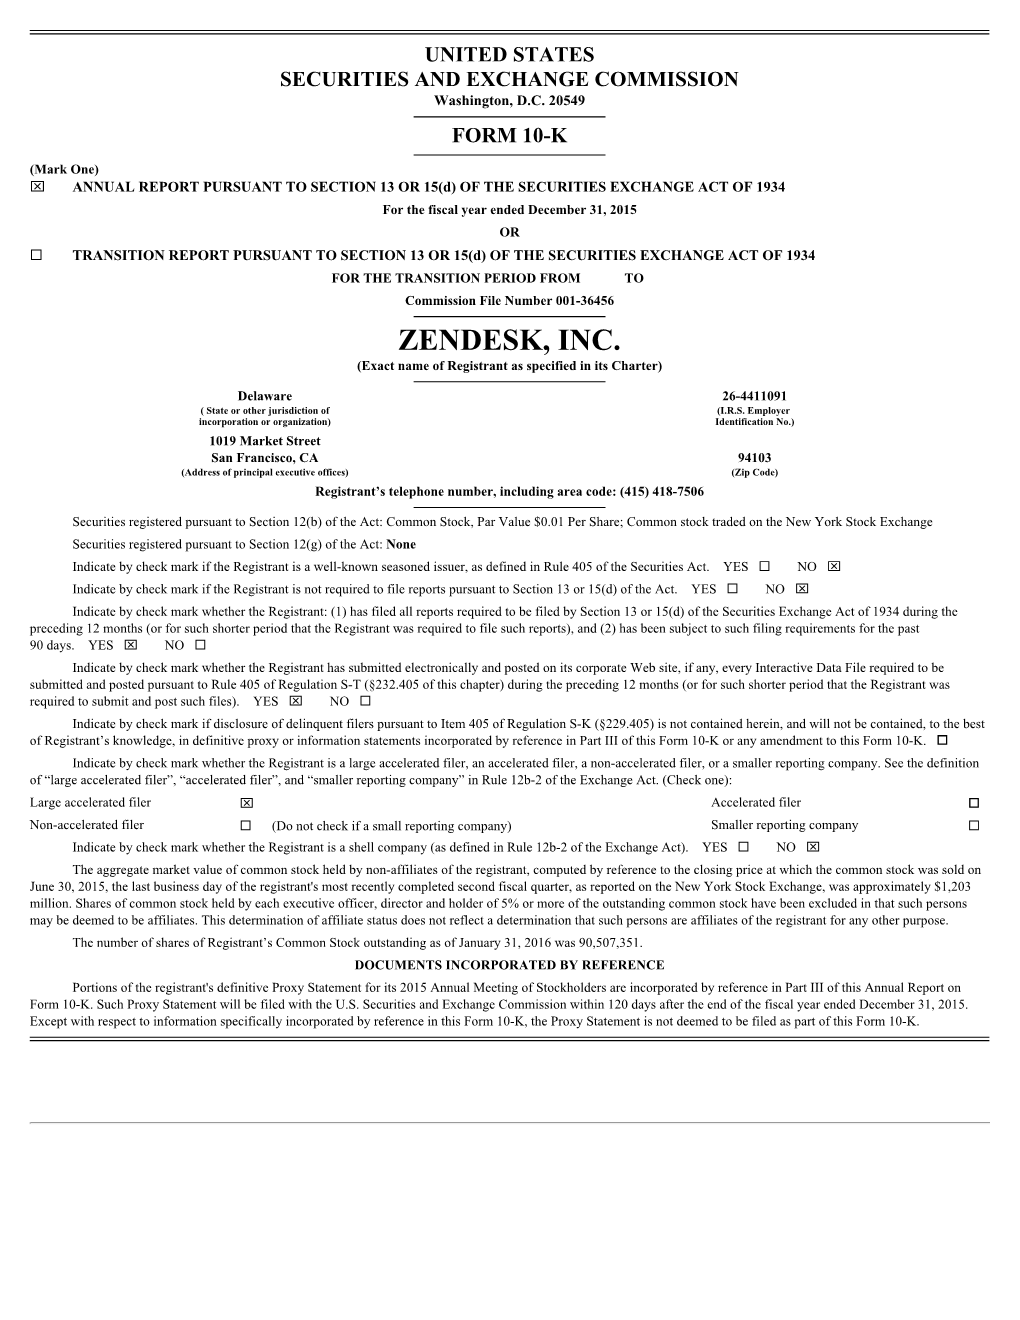 ZENDESK, INC. (Exact Name of Registrant As Specified in Its Charter)